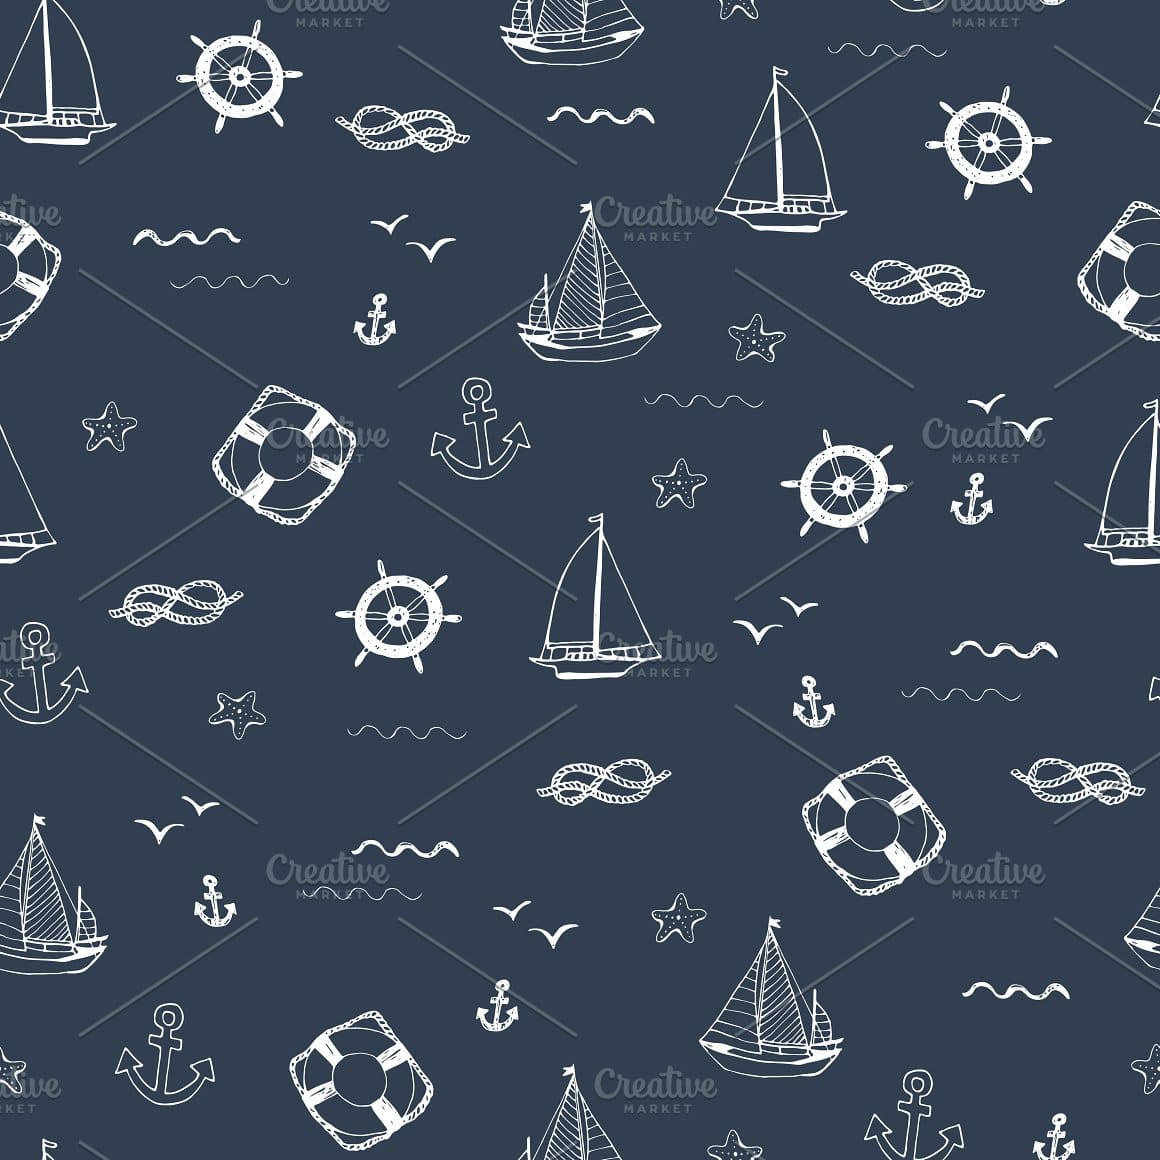 Seagulls, sea knots, anchors on a dark blue background are painted in white.